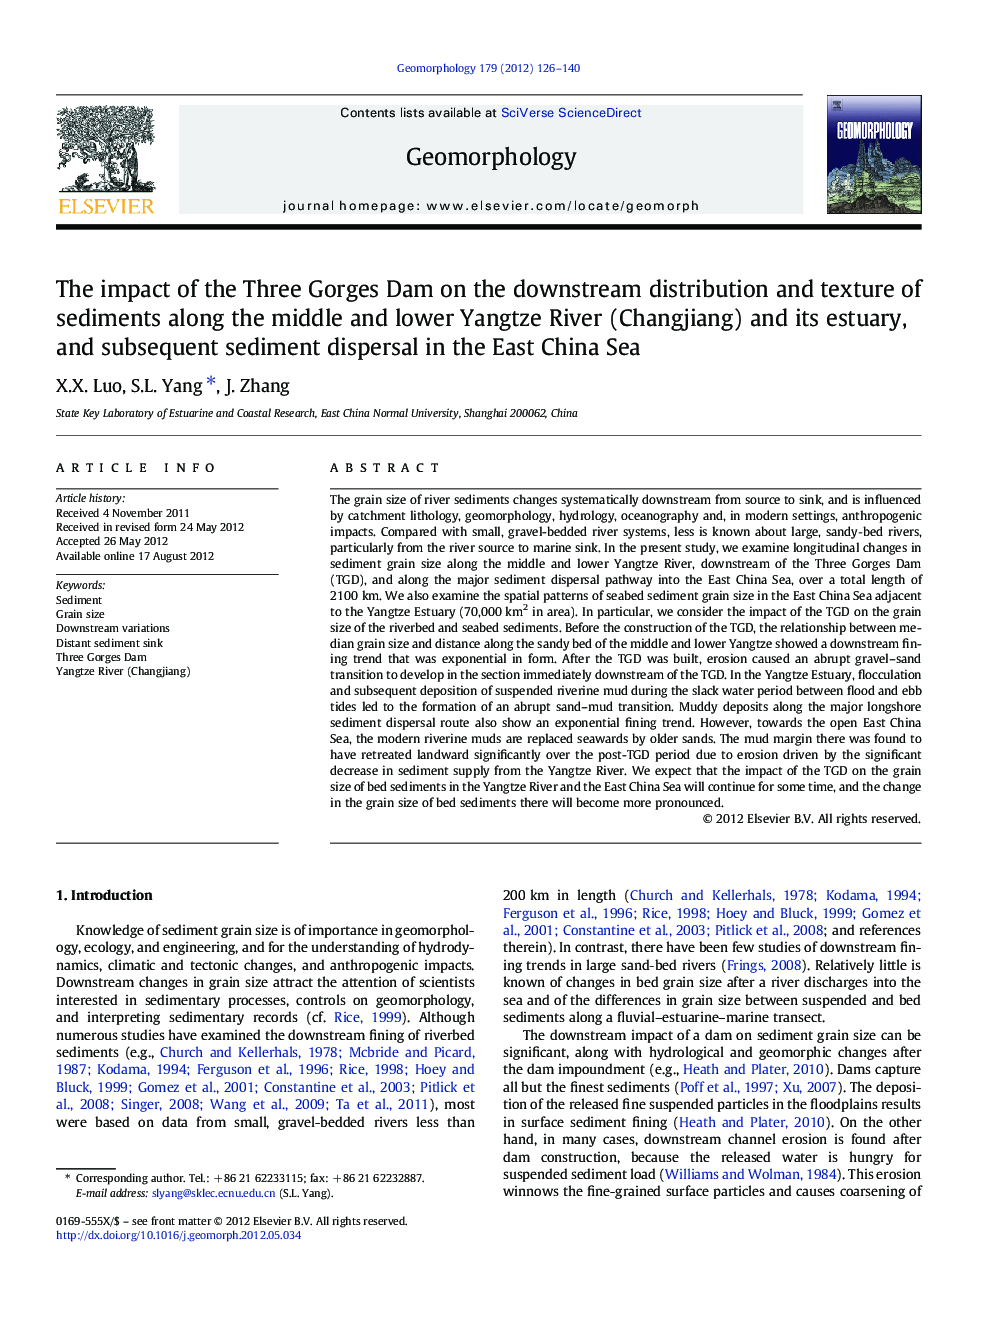 The impact of the Three Gorges Dam on the downstream distribution and texture of sediments along the middle and lower Yangtze River (Changjiang) and its estuary, and subsequent sediment dispersal in the East China Sea